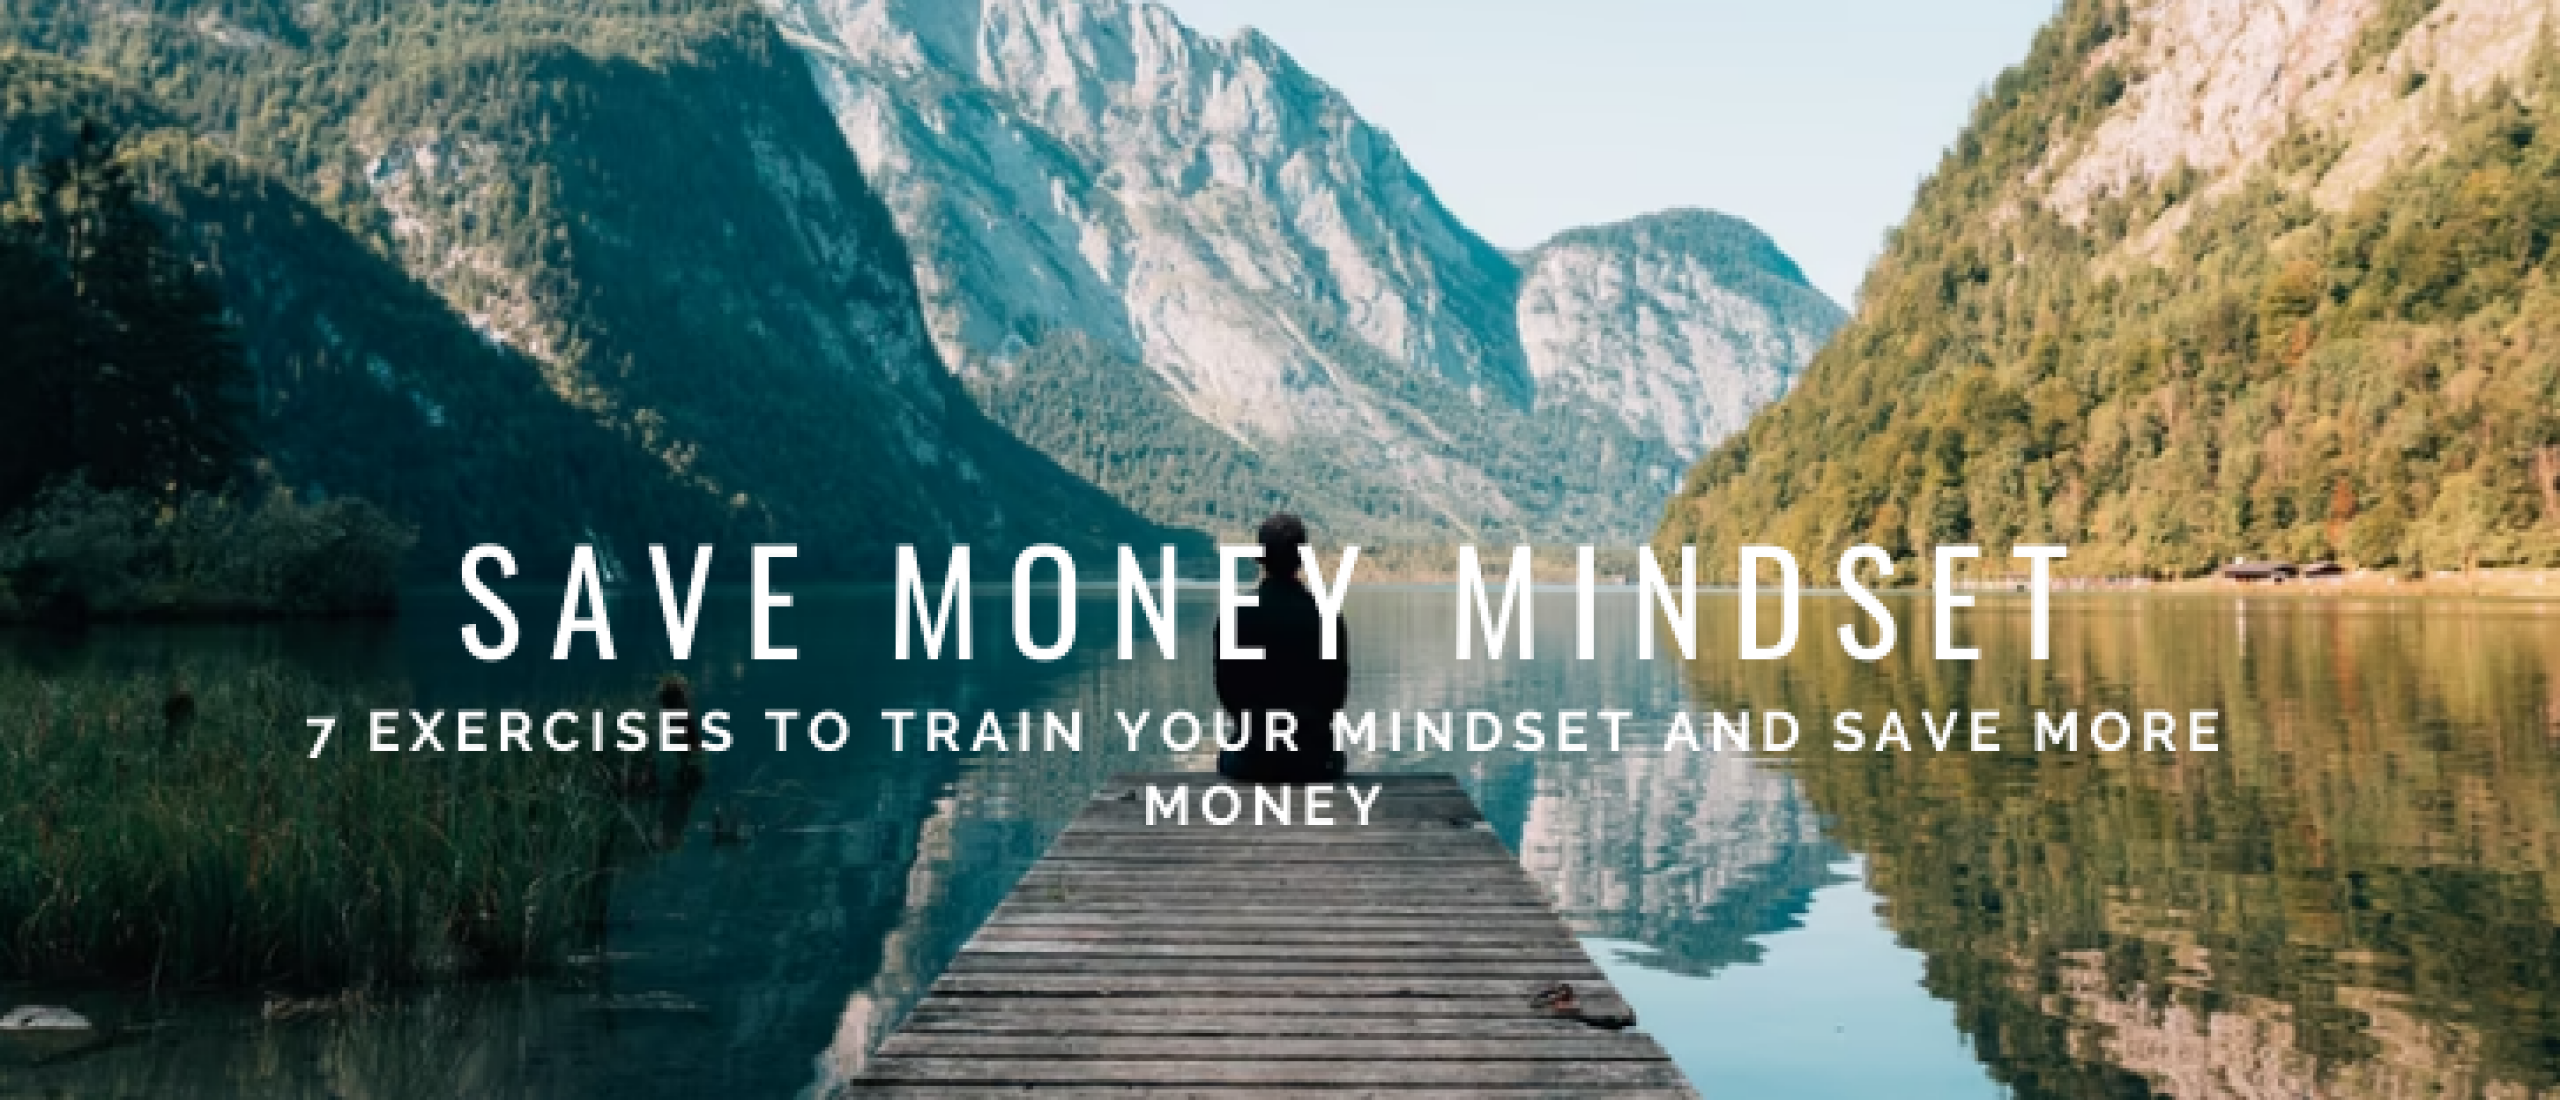 Save Money Mindset: 7 Exercises To Practice Daily